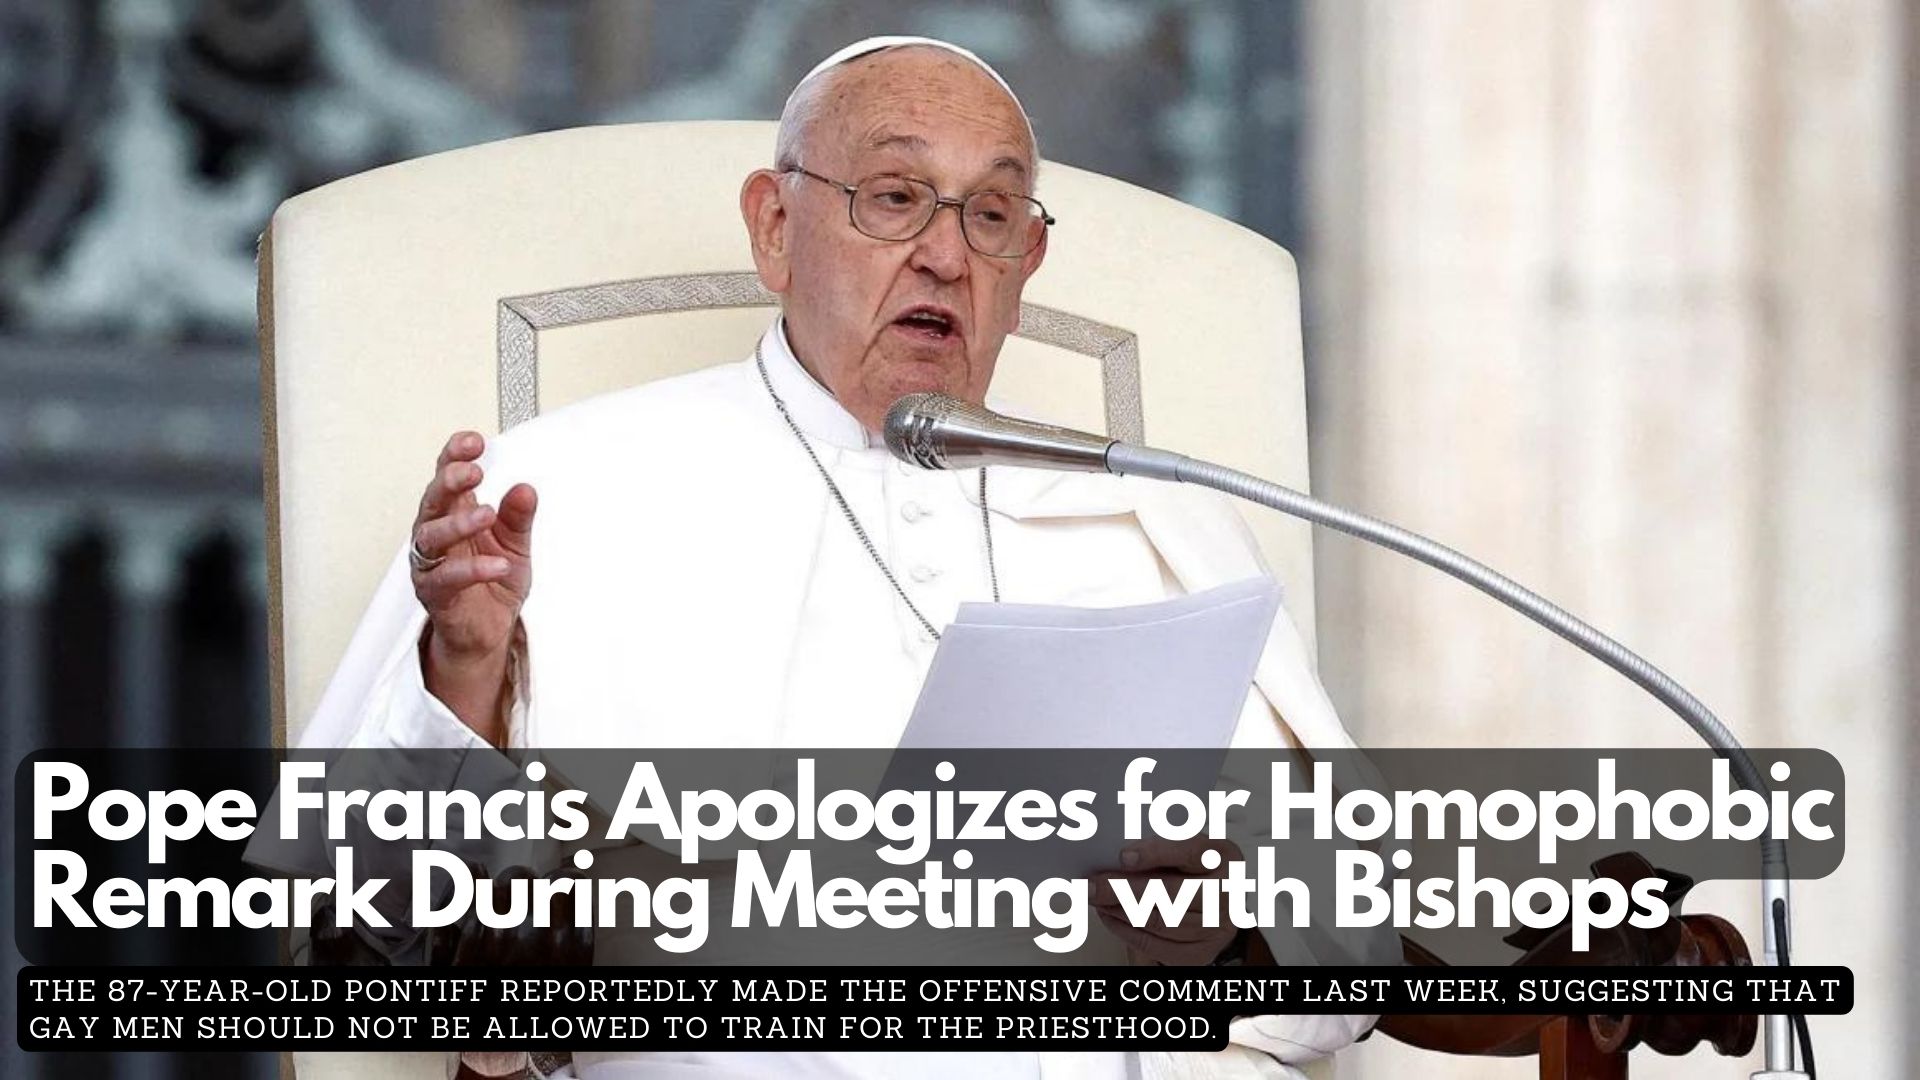 Pope Francis Apologizes for Homophobic Remark During Meeting with Bishops